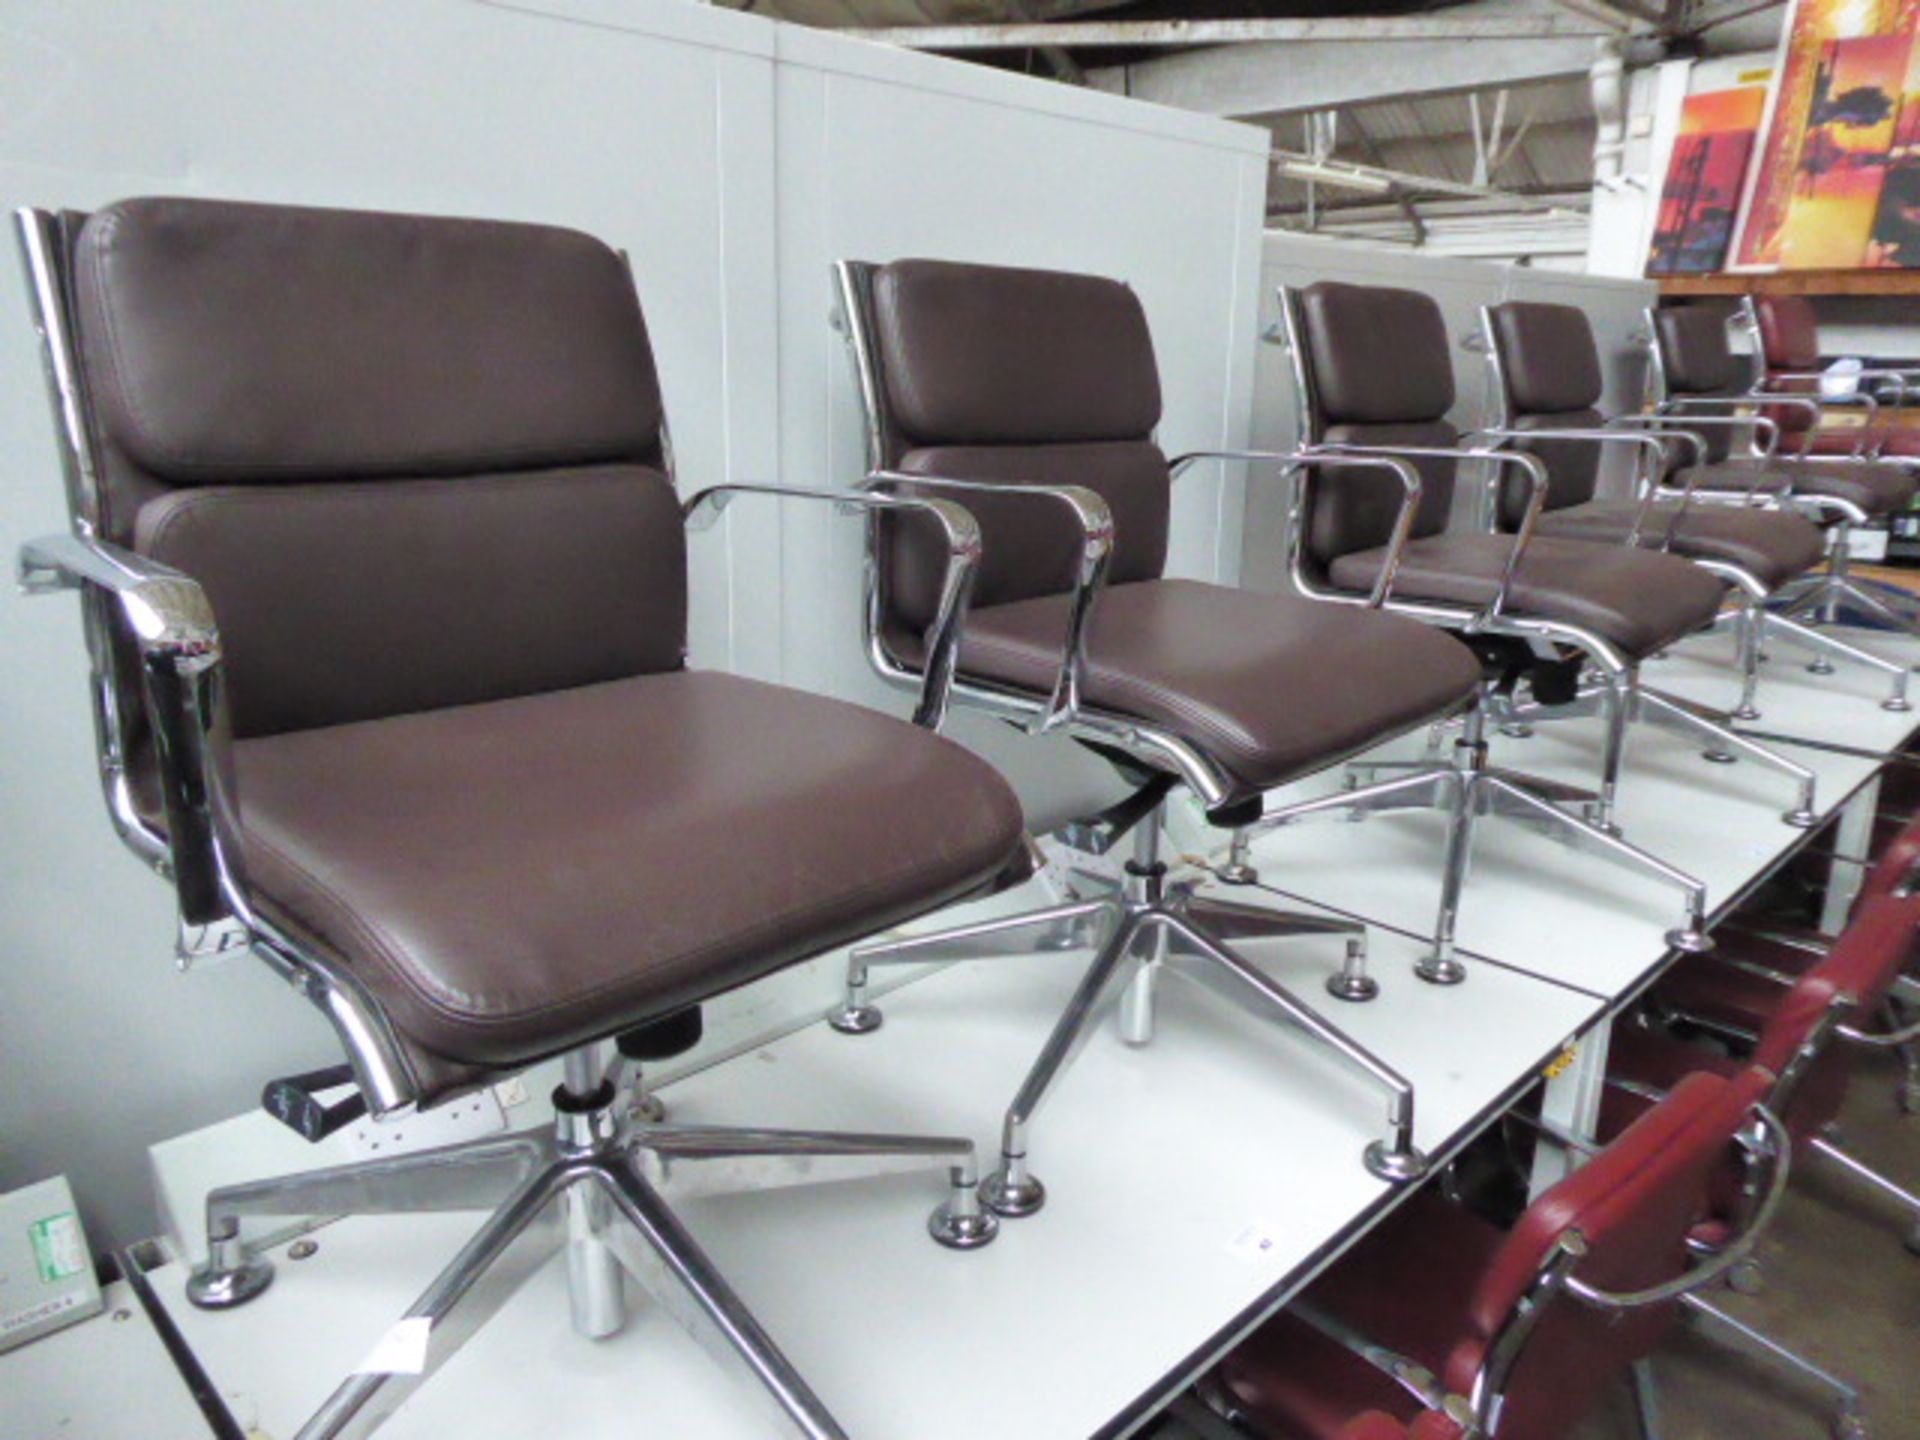 4 Milani Charles Eames style soft pad swivel armchairs in dark brown leather (4 with castors) - Image 3 of 3